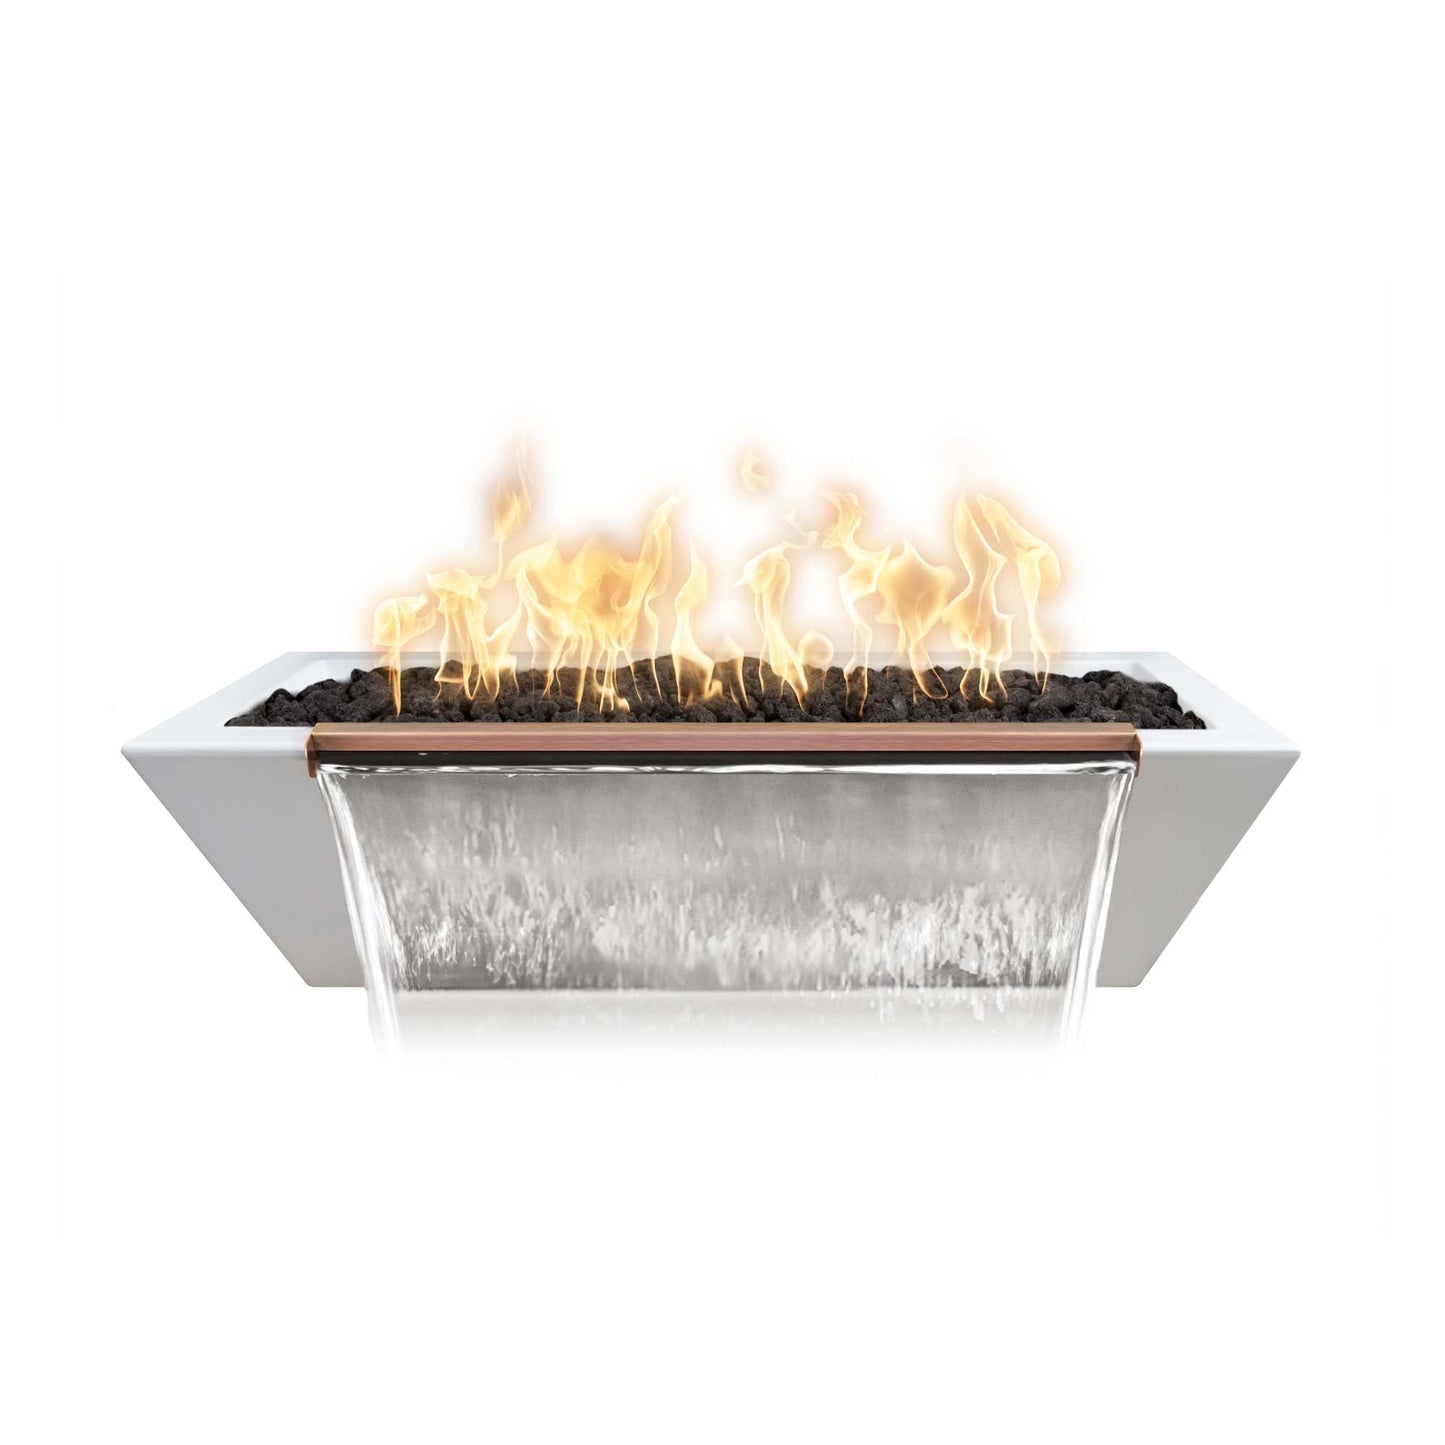 The Outdoor Plus Linear Maya 48" Natural Gray GFRC Concrete Natural Gas Fire & Water Bowl with Match Lit with Flame Sense Ignition